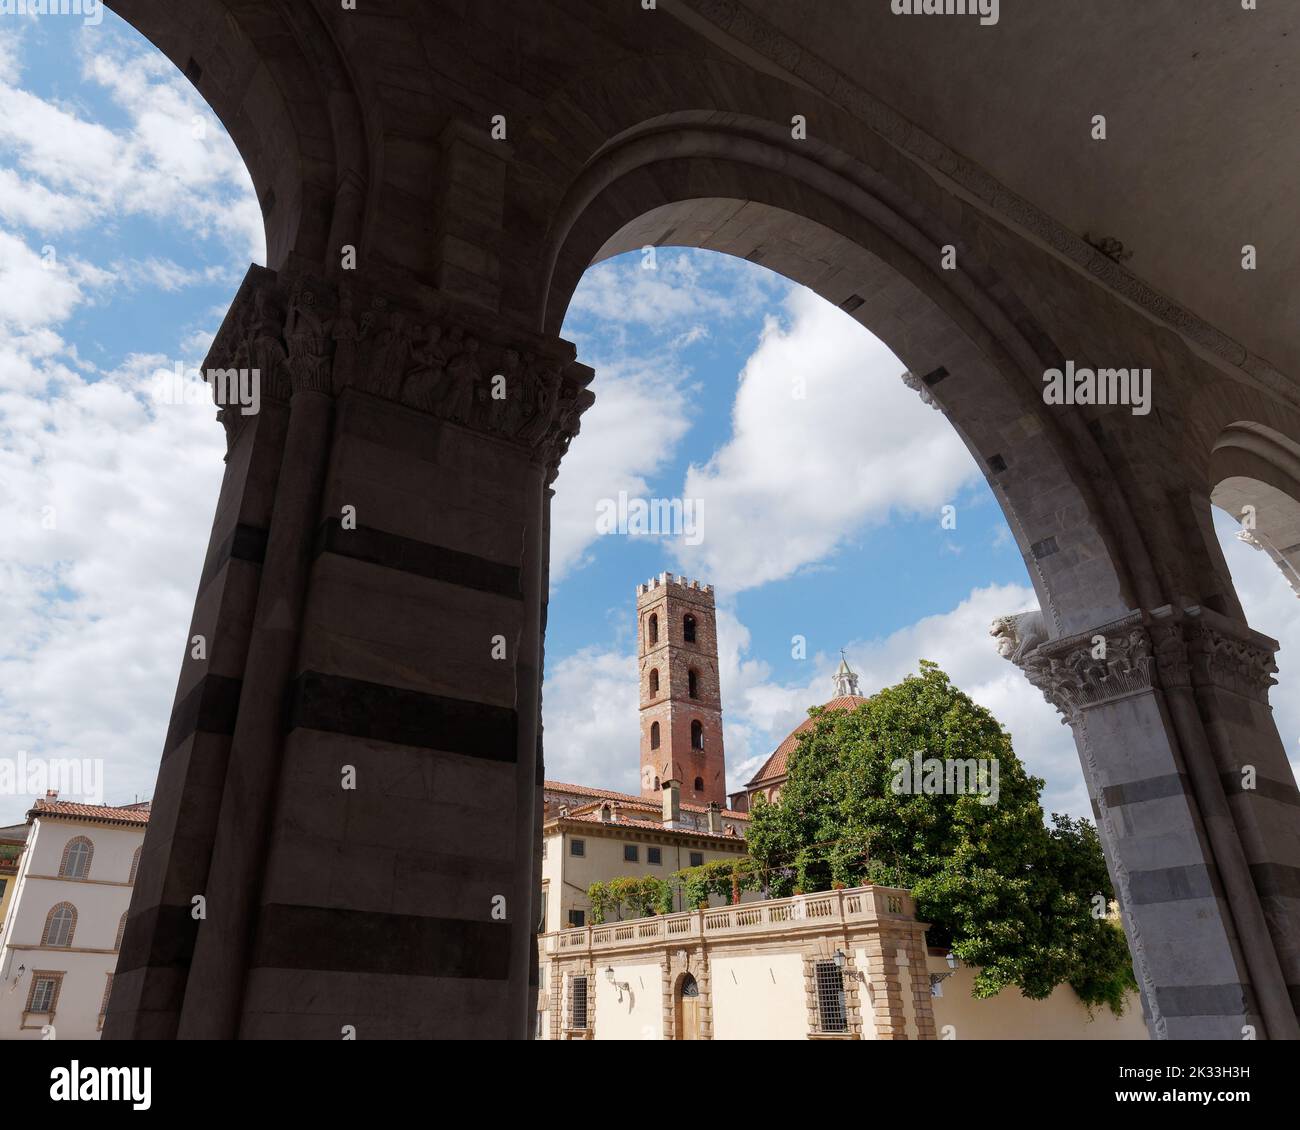 View from San Martino (St Martin) Cathedral over Piazza San Martino n Lucca, Tuscany, Italy Stock Photo